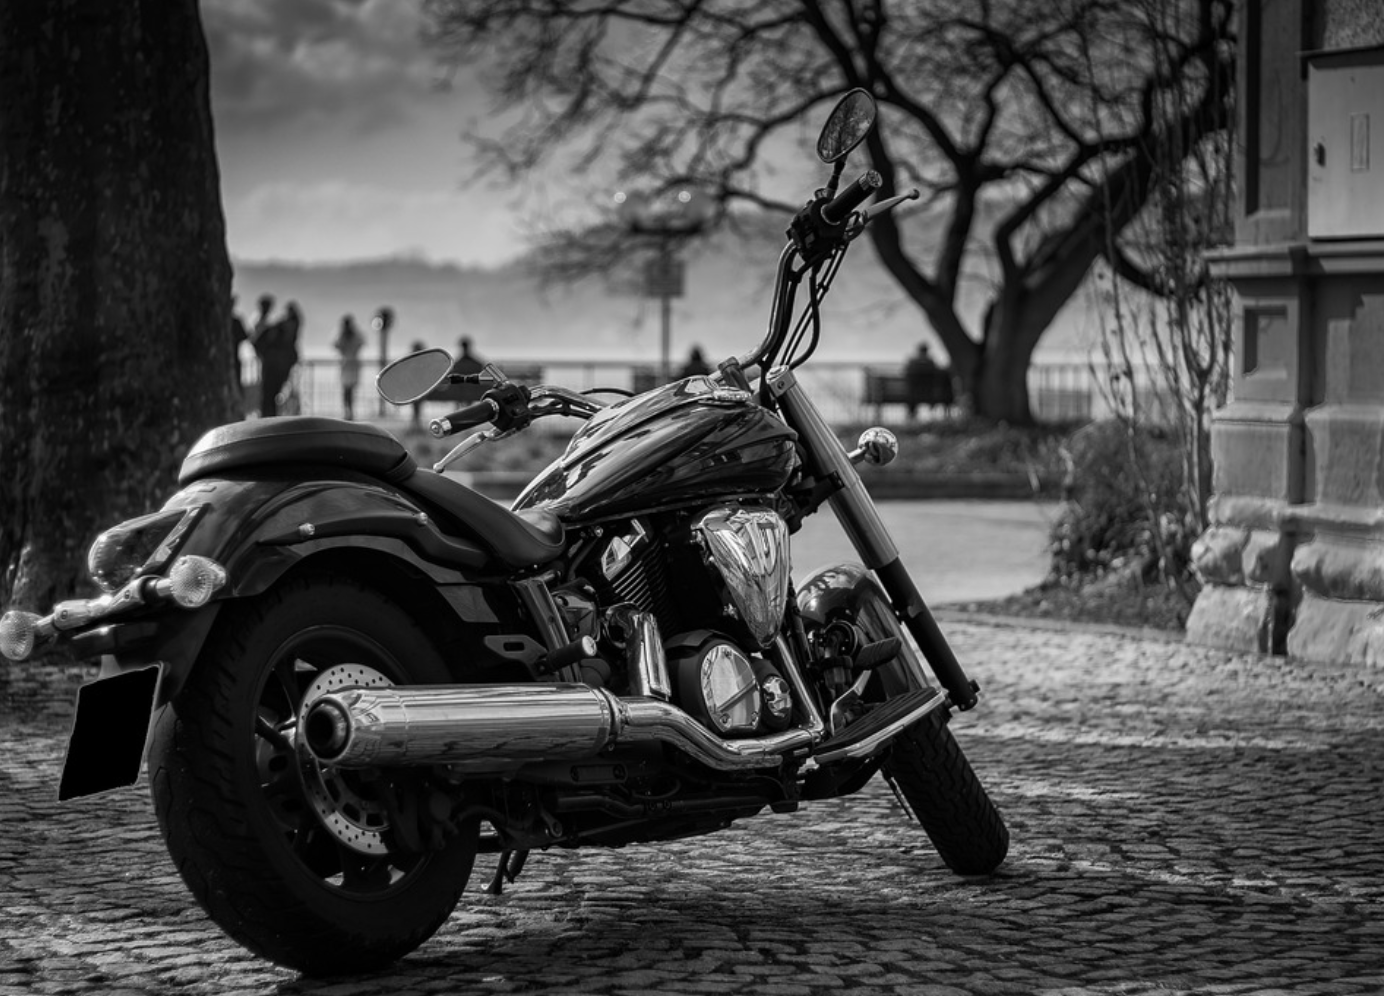 Black and white still of motorcycle; image by LN Photoart, via Pixabay.com.